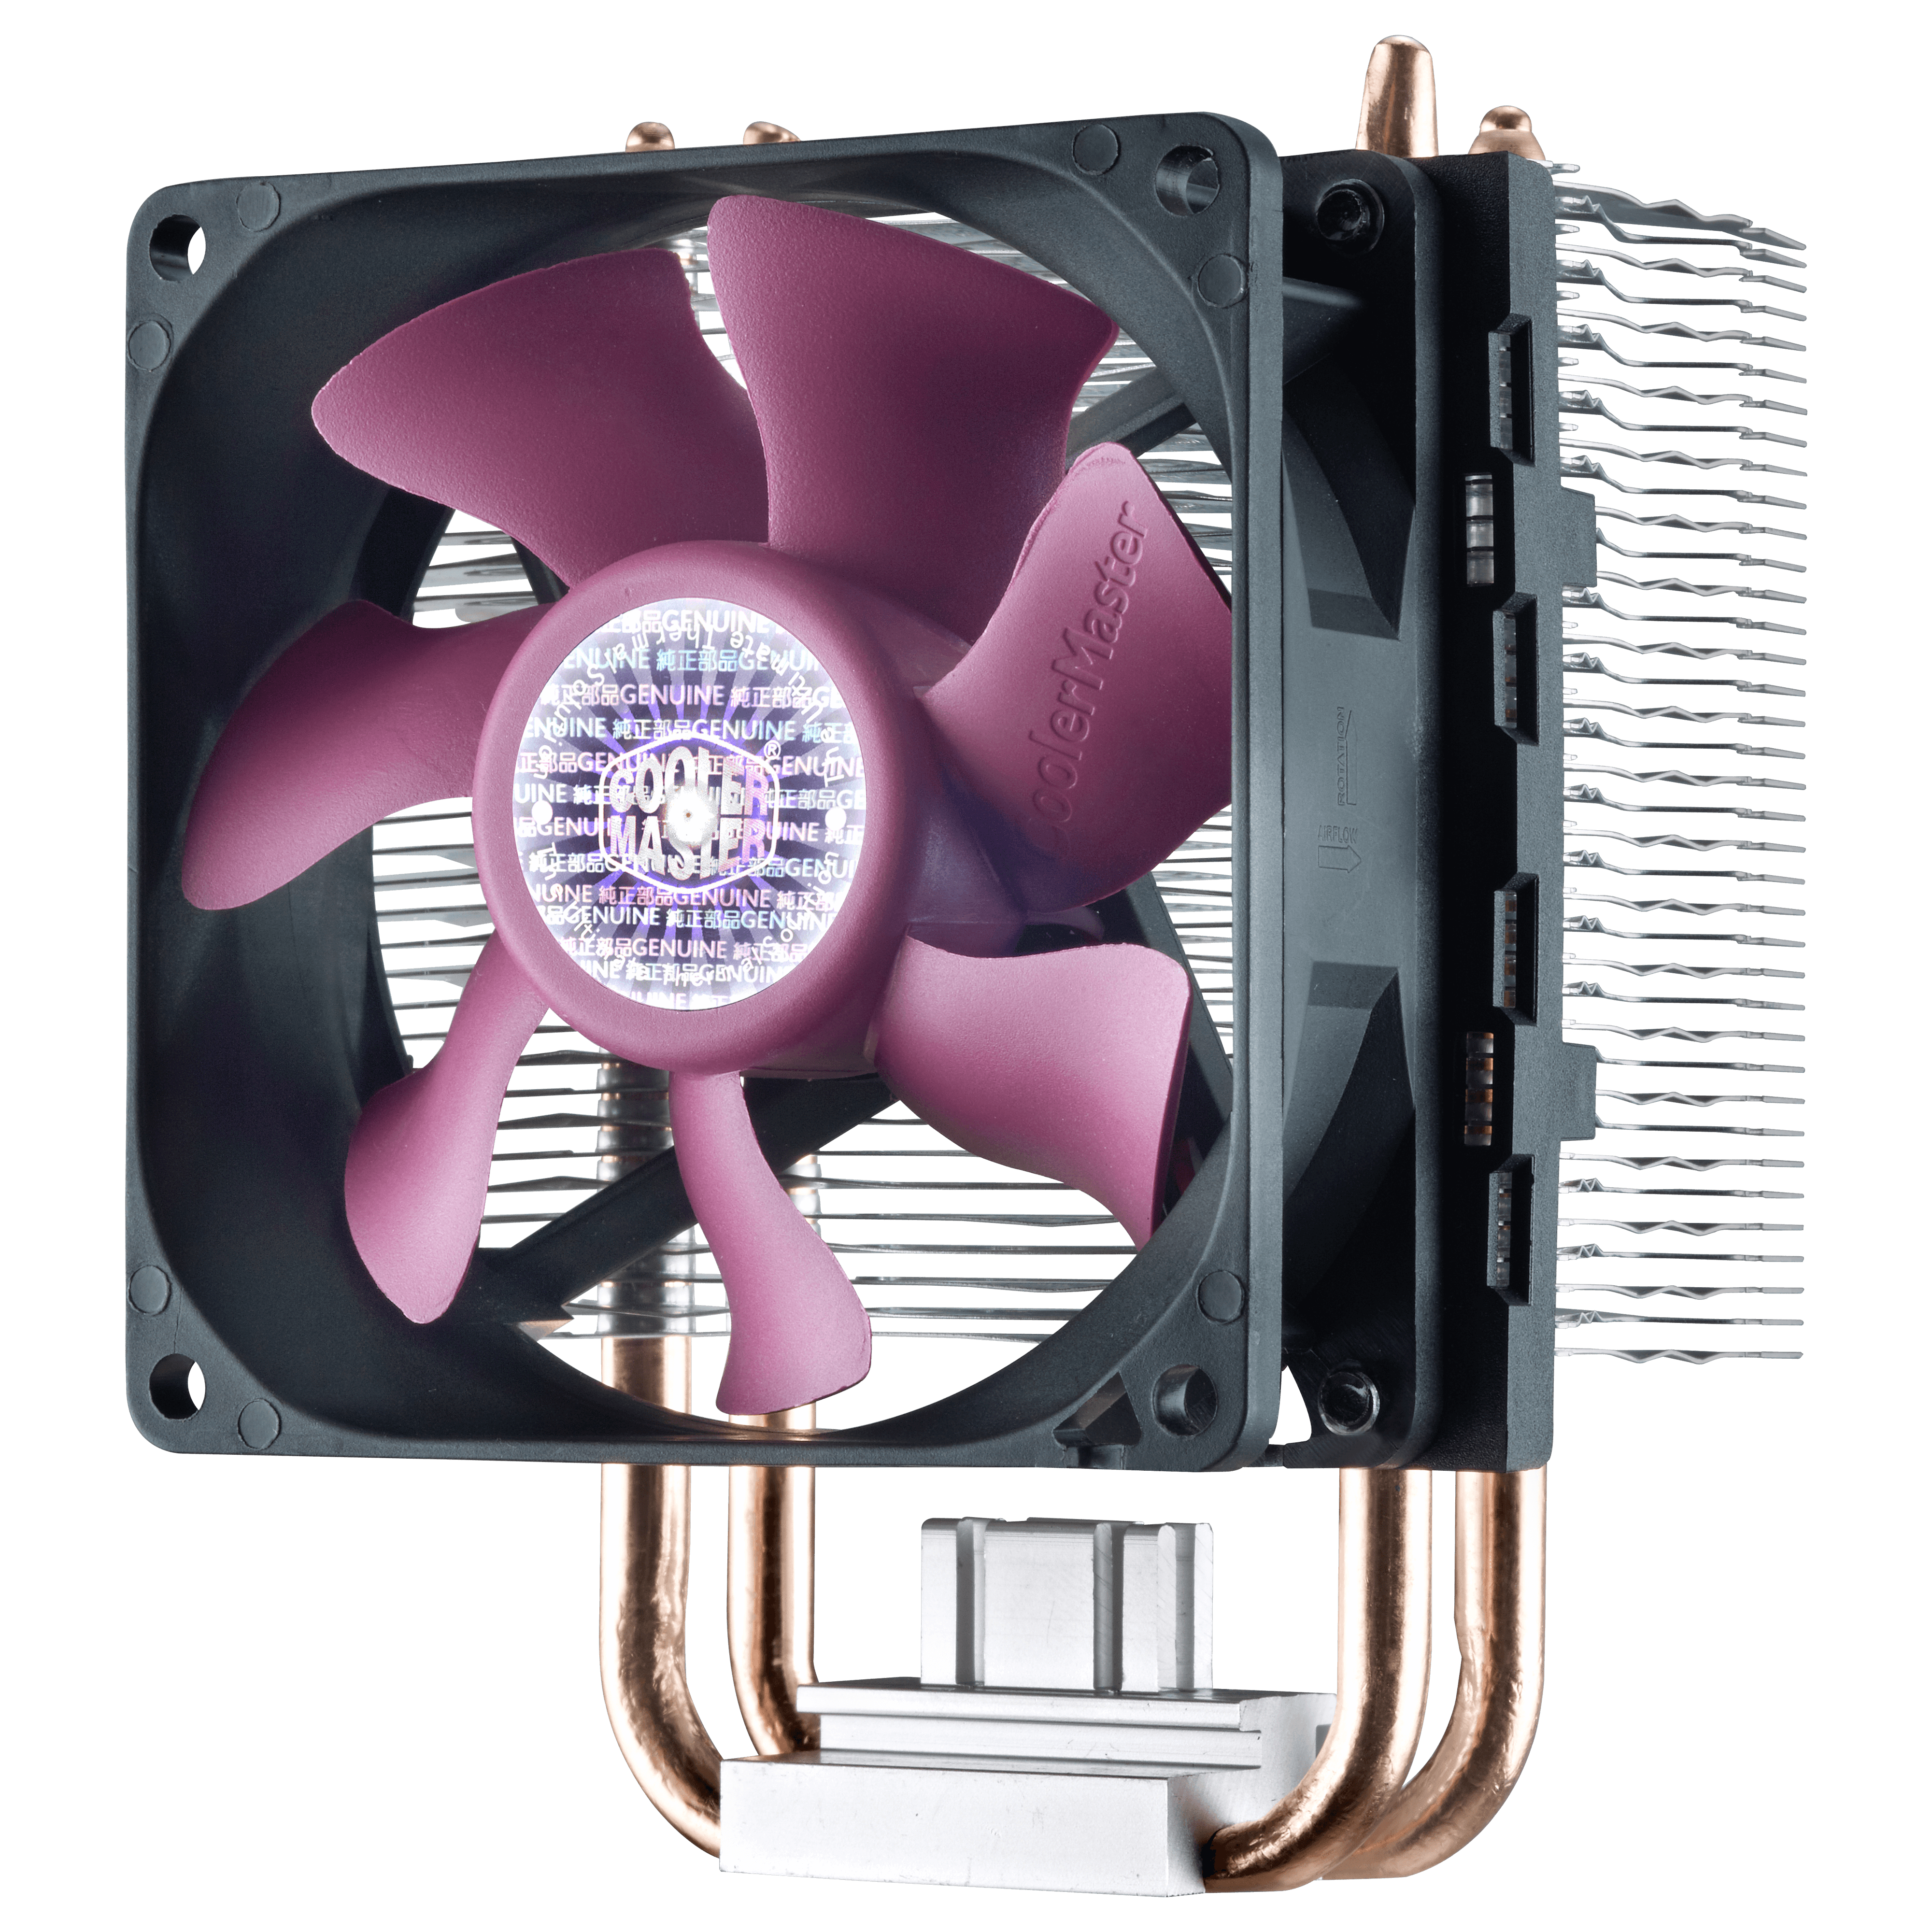 Cooler Master t20 (New). Blizzard t220. Versa h17 Max Cooler height. COOREL MAXPOWER output 2000w. Кулер max